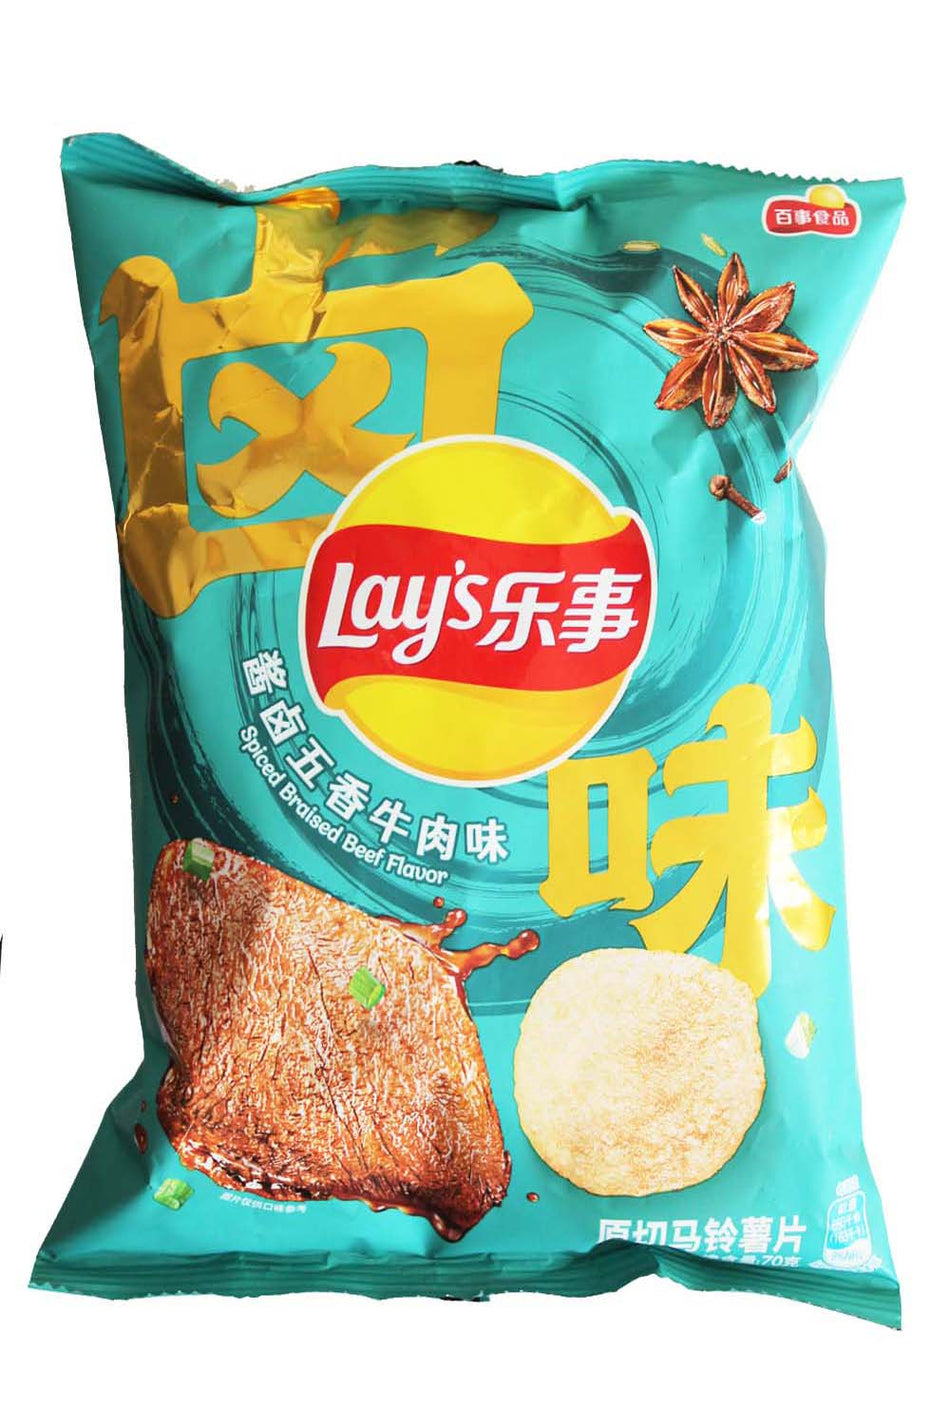 Lay's  Spice Braised  Beef flavor chip